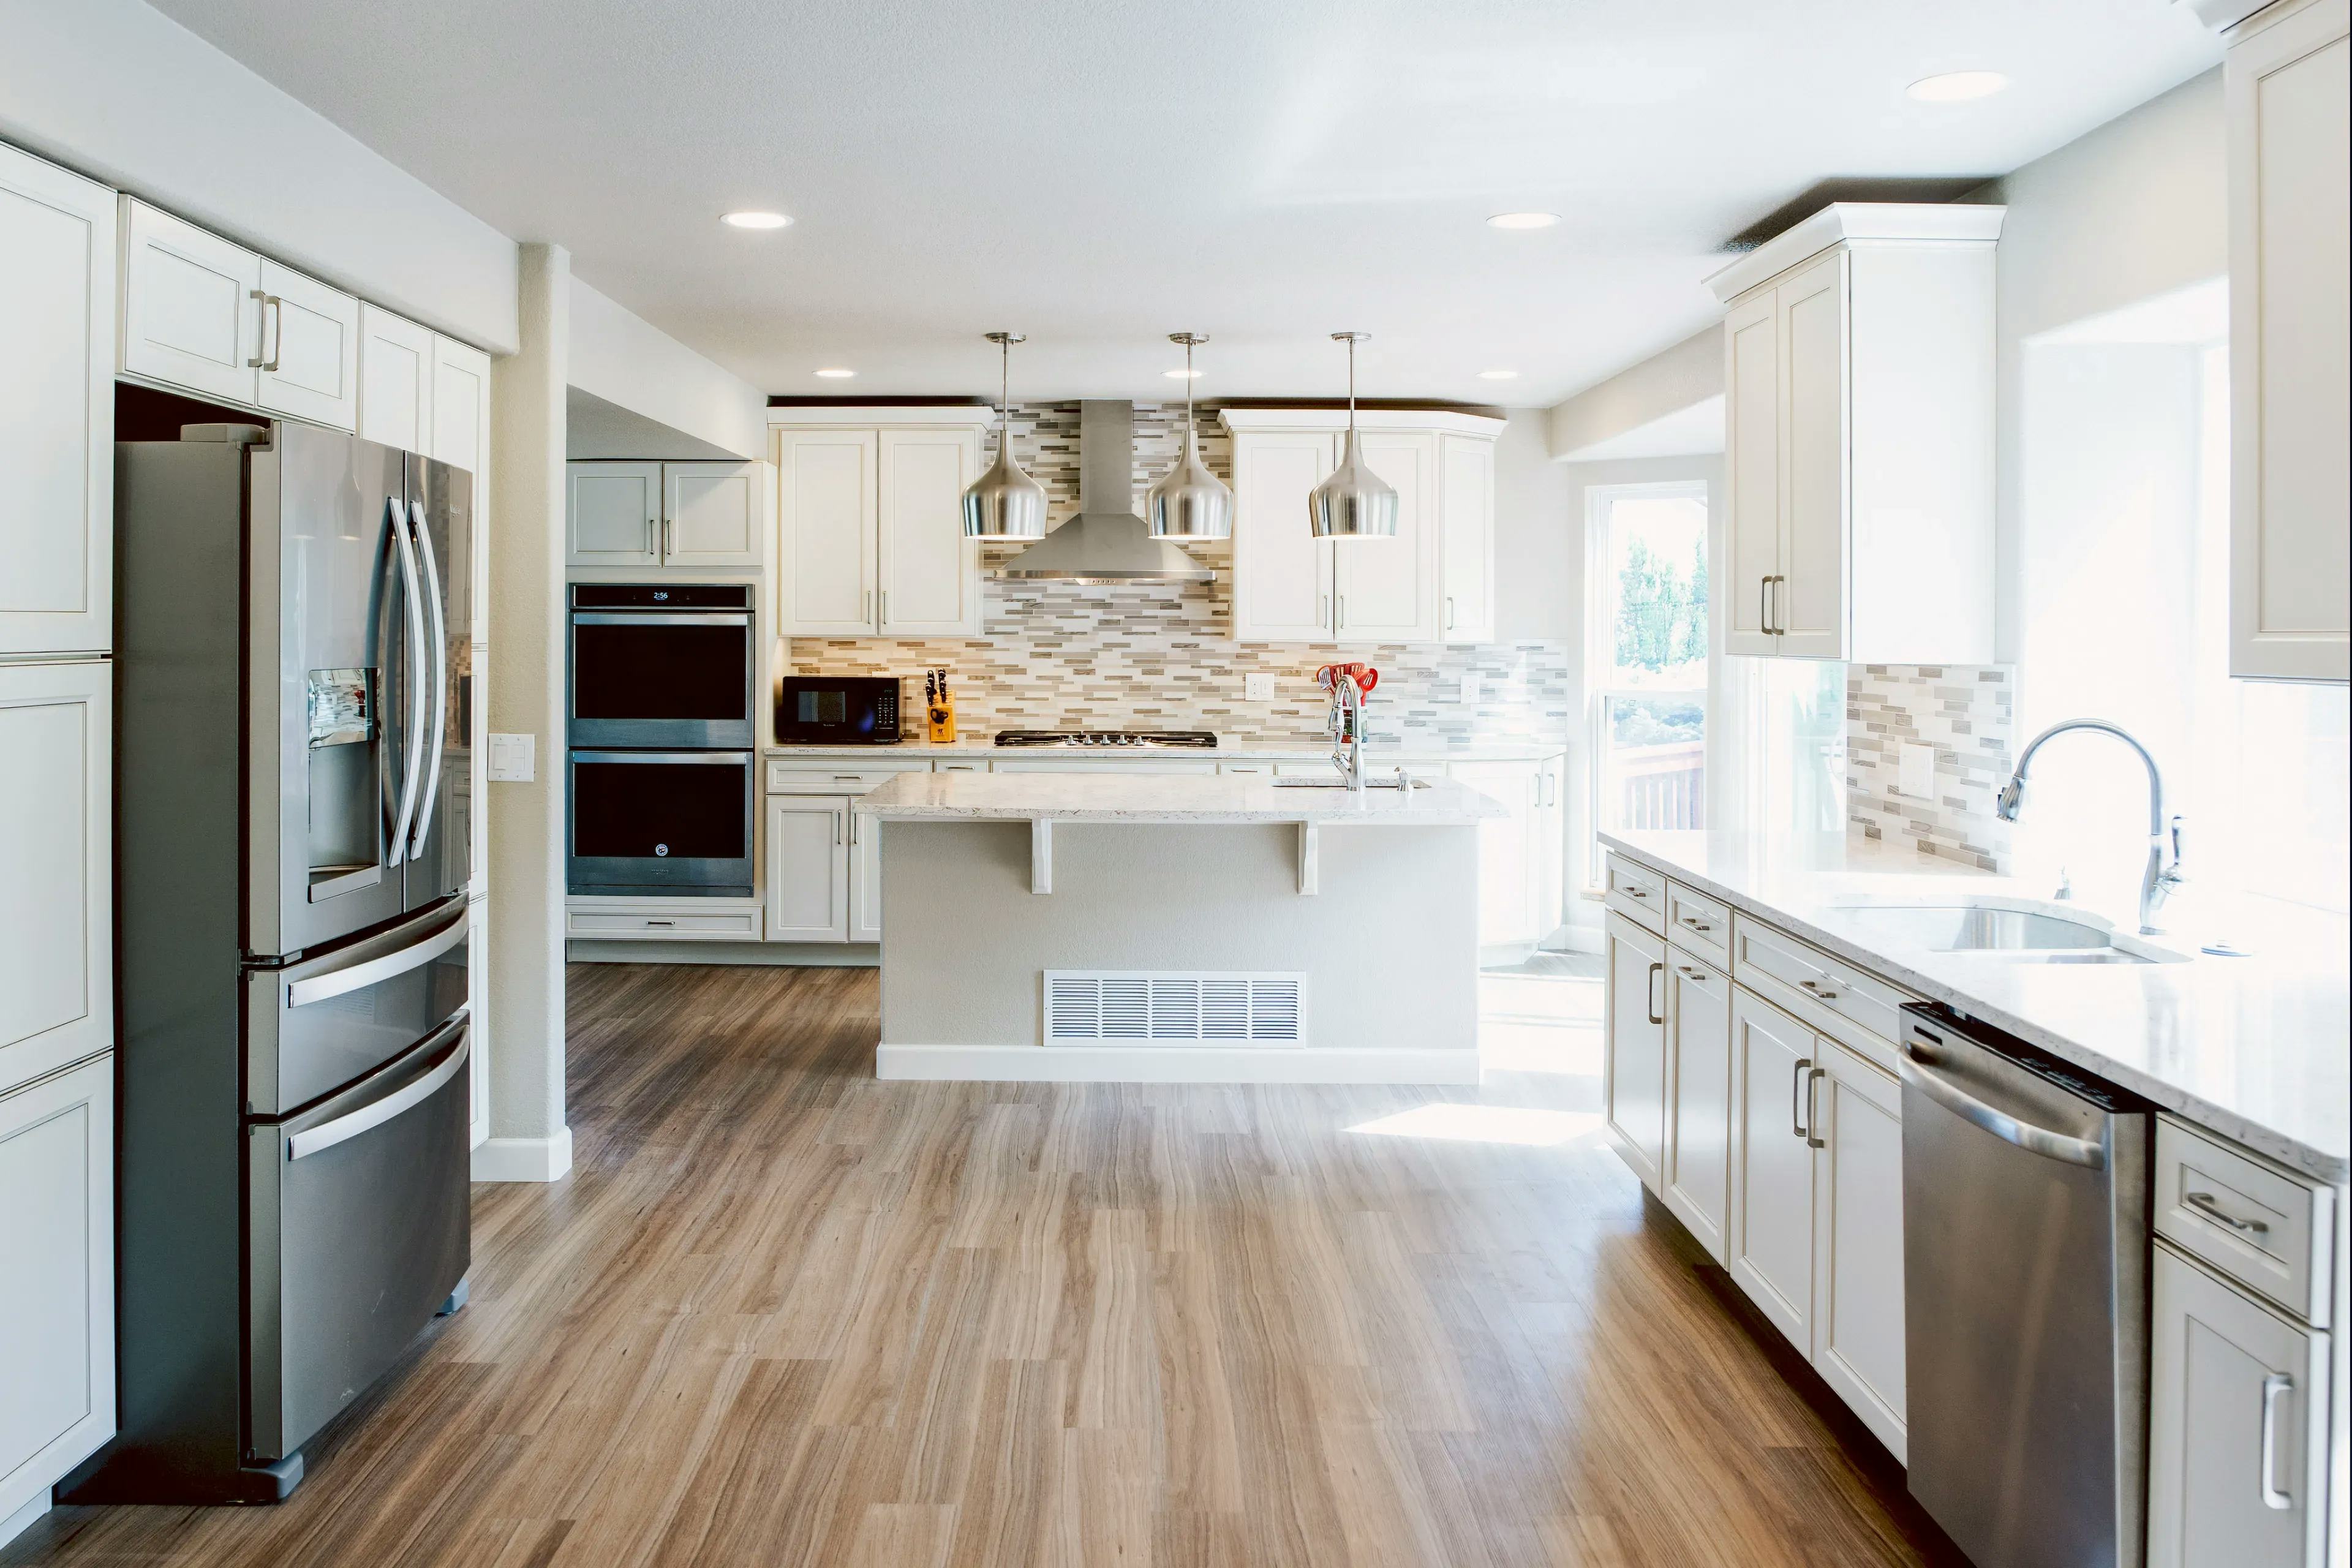 A wide angle photo showing an entirely new remodeled minimal kitchen with white cabinets, countertops, wooden floors and stainless steel appliances